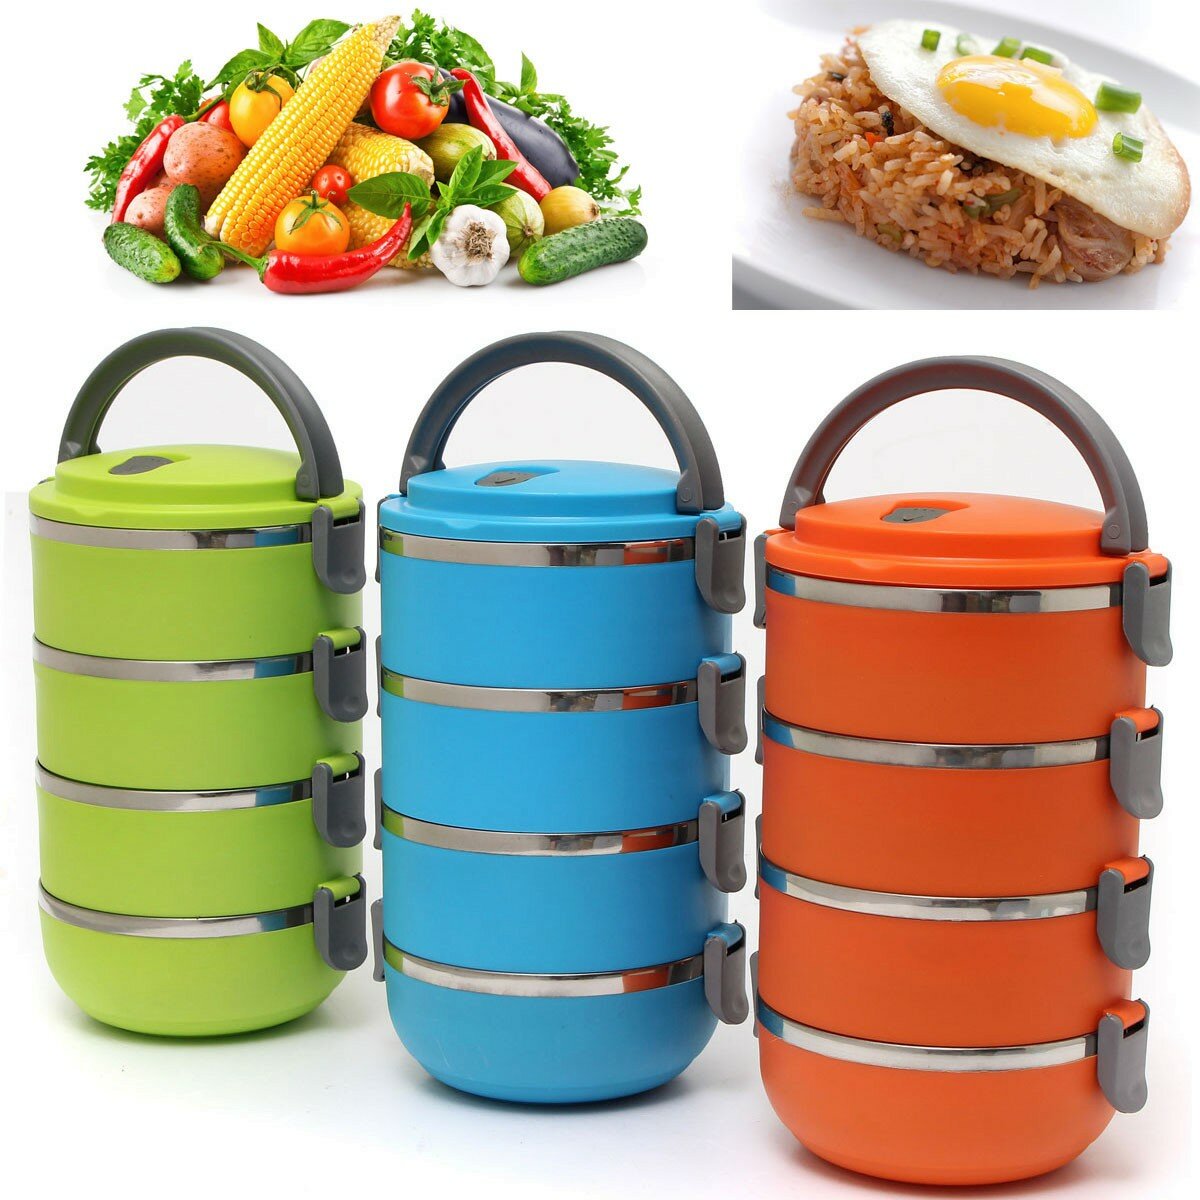 

4 Layers Portable Stainless Steel Bento Lunch Box, Green orange blue